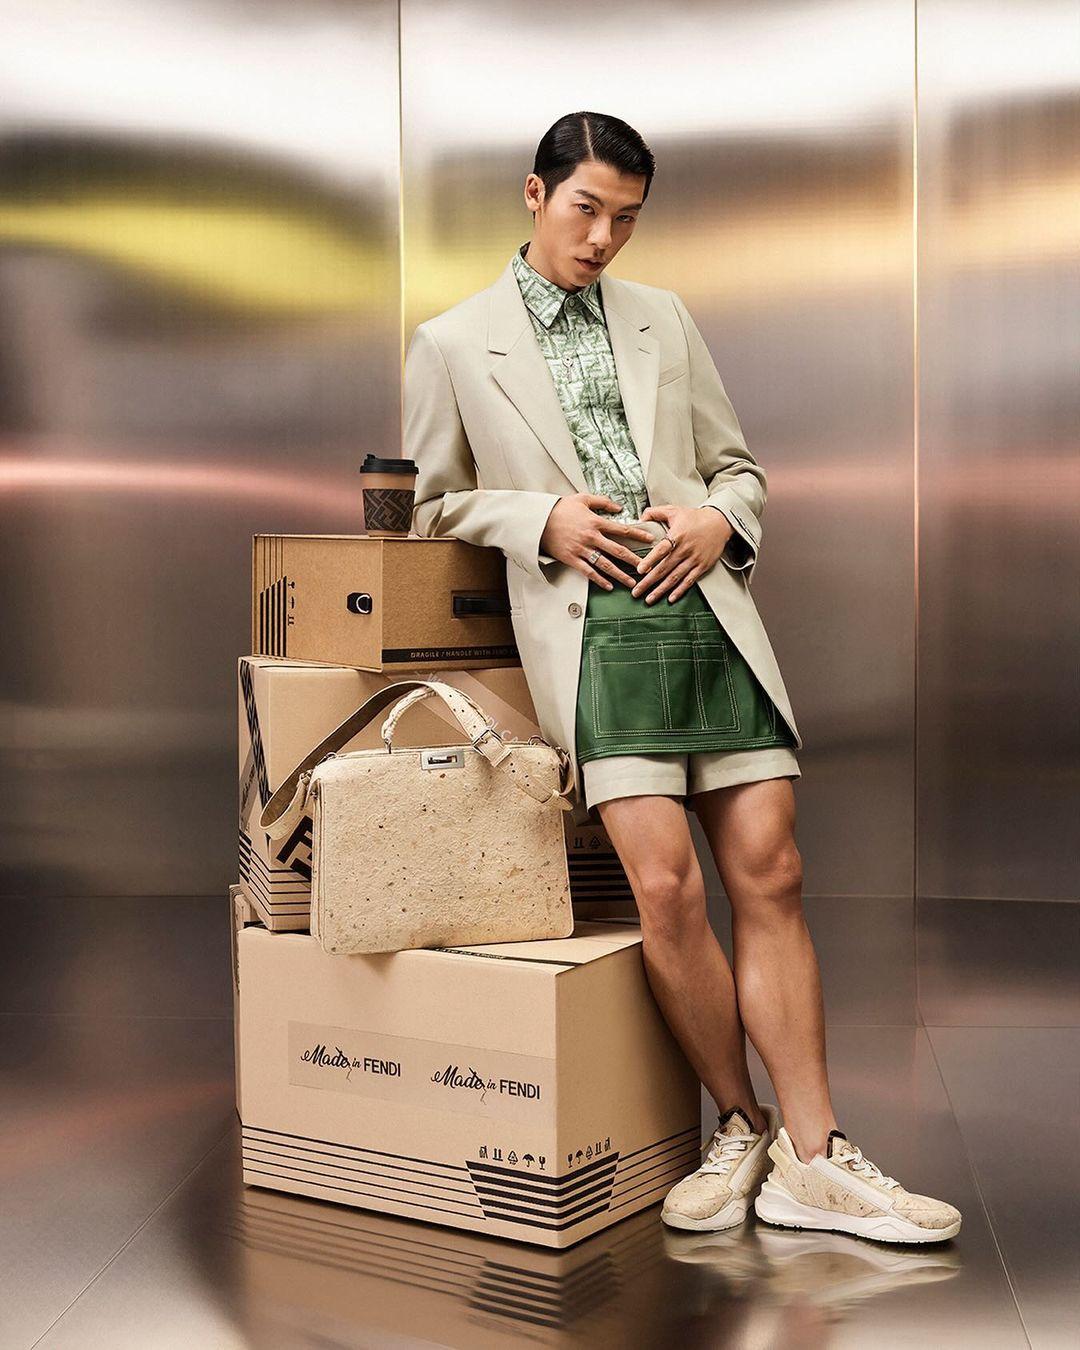 #FendiAmbassador Kuanghan Hsu stars in the #FendiSS24 campaign wearing the #FendiKengoKuma #FendiPeekaboo and #FendiFlow sneakers crafted alongside architect Kengo Kuma harnessing the traditional Japanese waranshi papermaking technique.

The collection launches worldwide on 8 February.	

Artistic Director of Accessories and Menswear: @silviaventurinifendi
Artistic Director of Jewellery: @delfinadelettrez

Creative and Film Direction: @nicovascellari
Photography: @brunostaub
Styling: @ganio

Talent: @kuanghanhsu

Hair: @garygillhair
Hair: @zoom_edmund
Makeup: @daniel_s_makeup
Makeup: @jasmine_kao1

Set Design: @andreacellerino